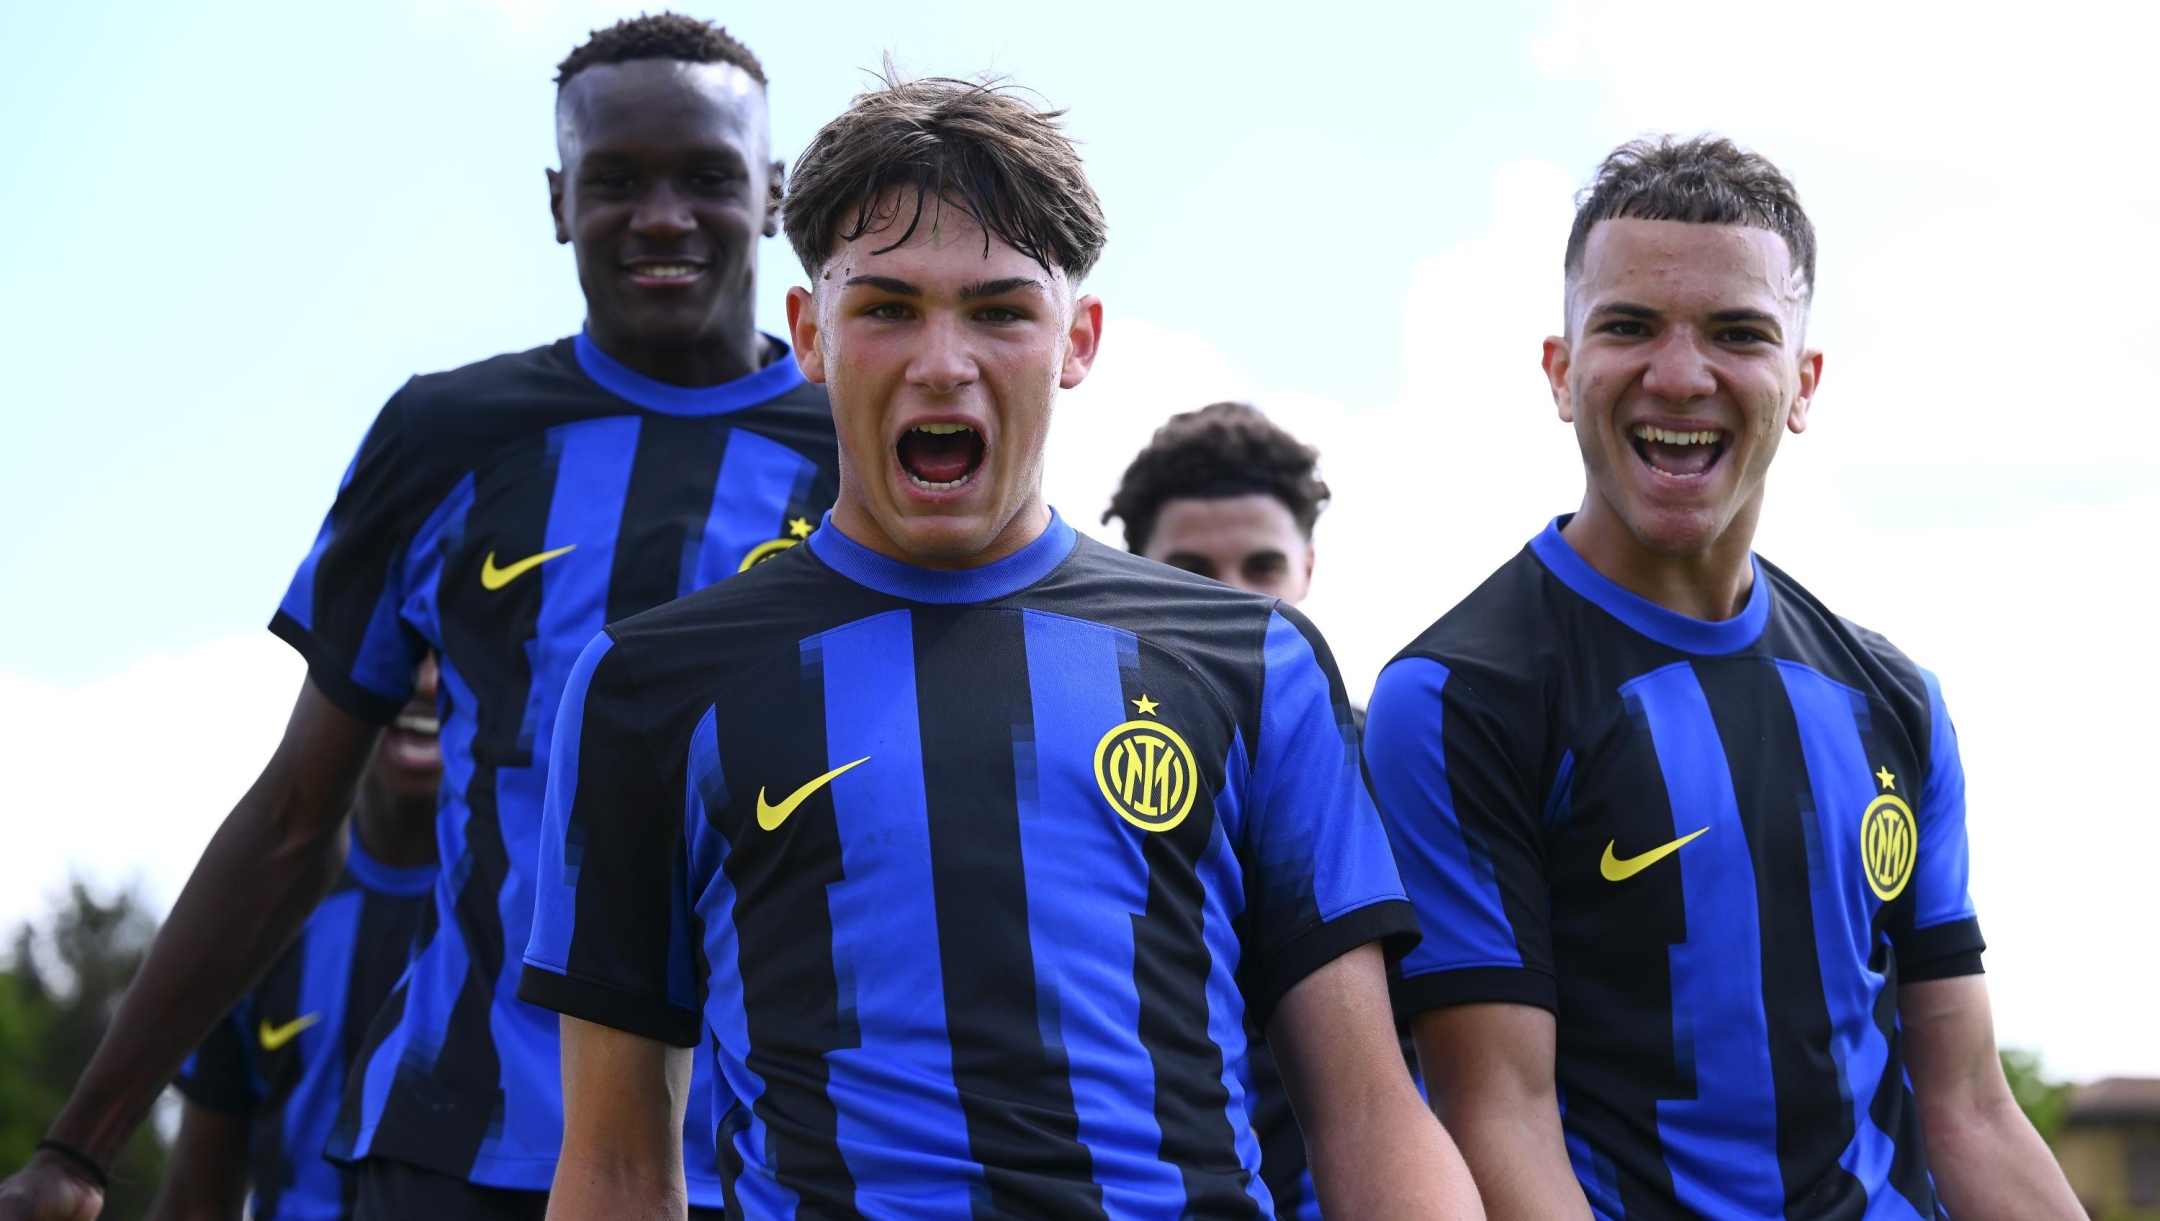 MILAN, ITALY - APRIL 25: Mattia Mosconi of FC Internazionale U17 celebrates after scoring the second goal with teammates during the match between FC Internazionale U17 and AC Milan U17 at Konamy Youth Development Centre in memory of Giacinto Facchetti on April 25, 2024 in Milan, Italy. (Photo by Mattia Pistoia - Inter/Inter via Getty Images)